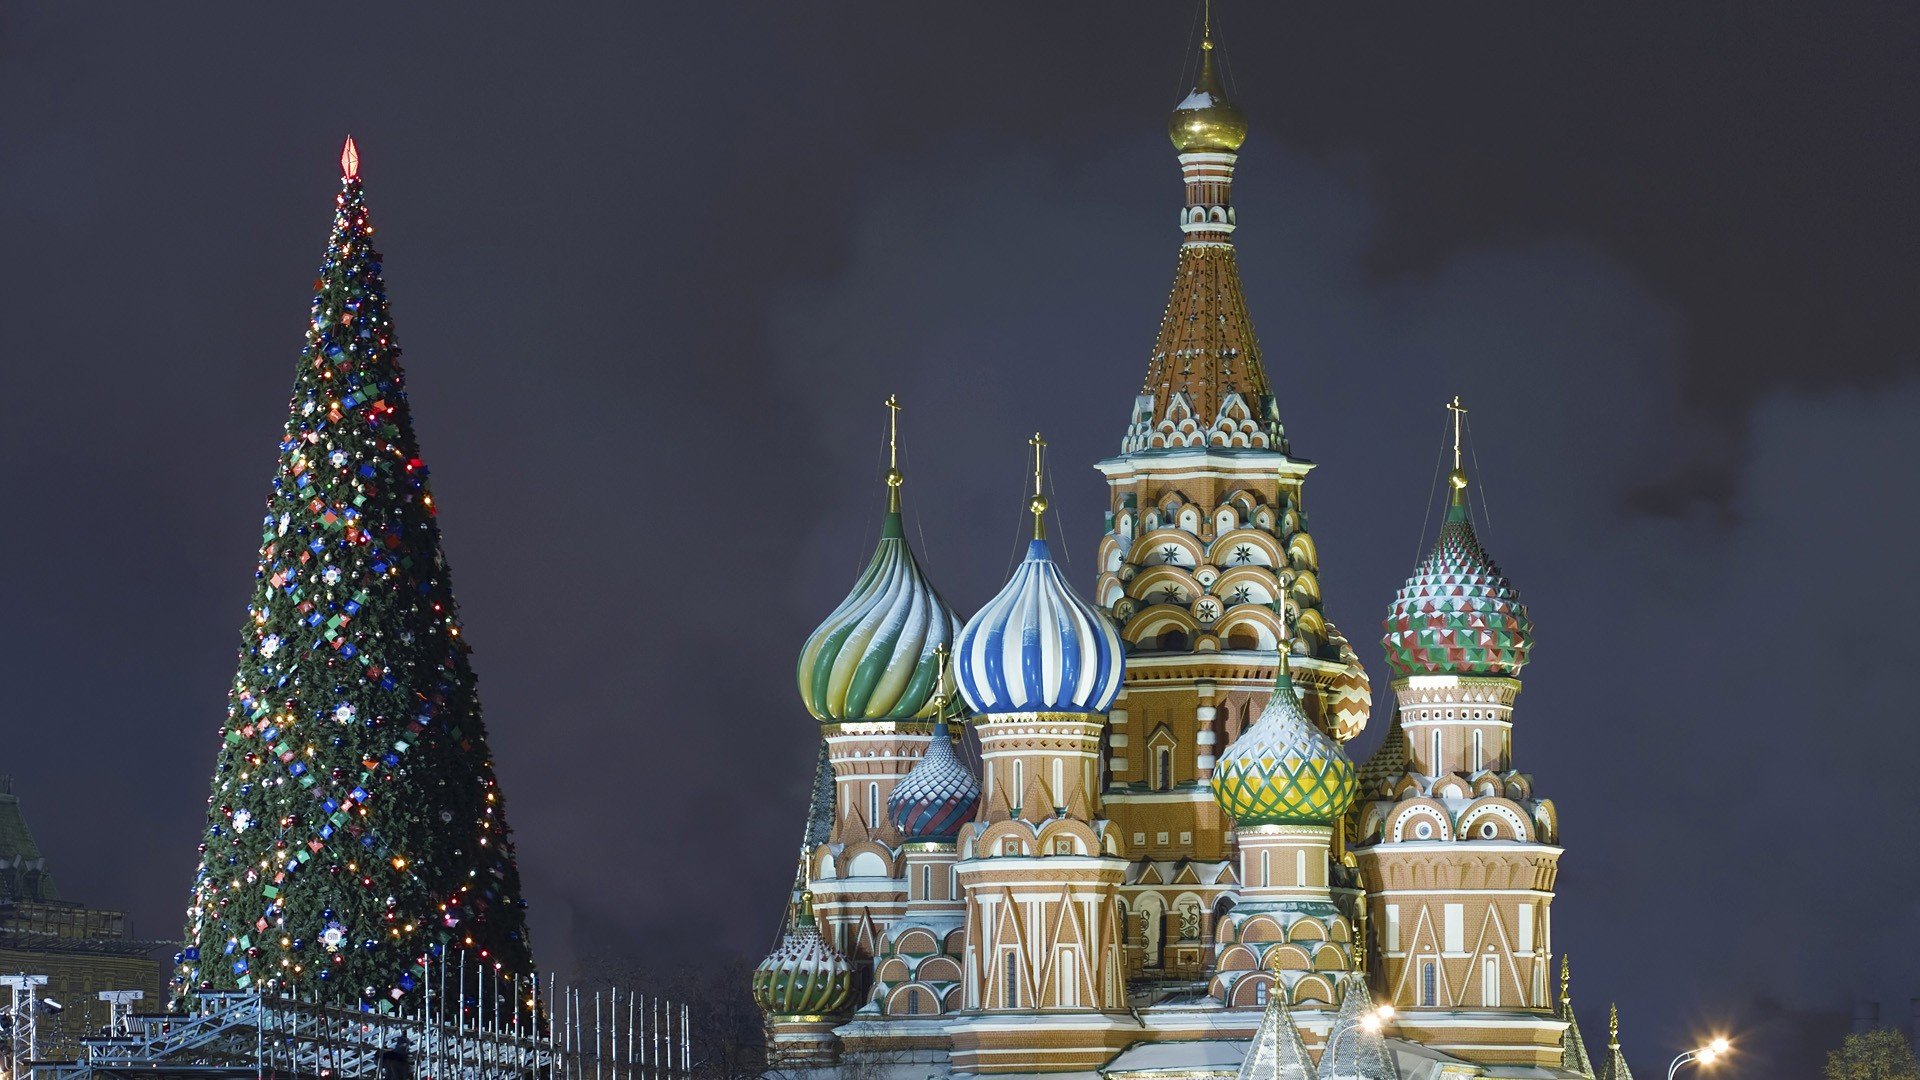 Russia Christmas Wallpaper 1920x1080 Russia Christmas Moscow